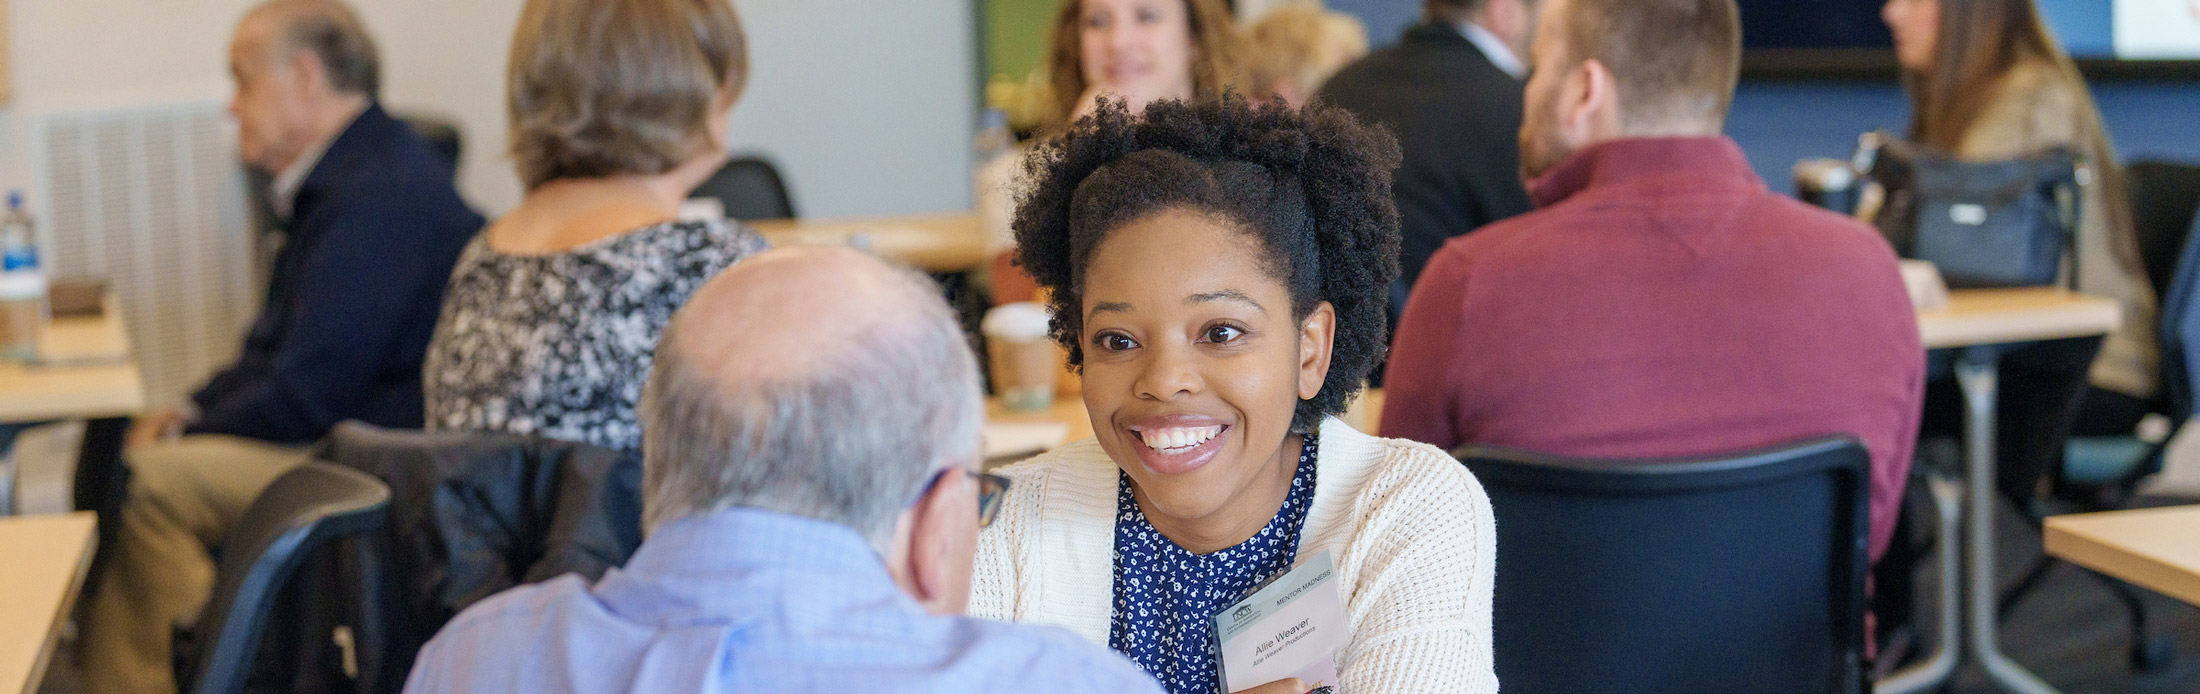 Entrepreneur sitting at a table during an event and engaged in conversation with a mentor seated across from her.